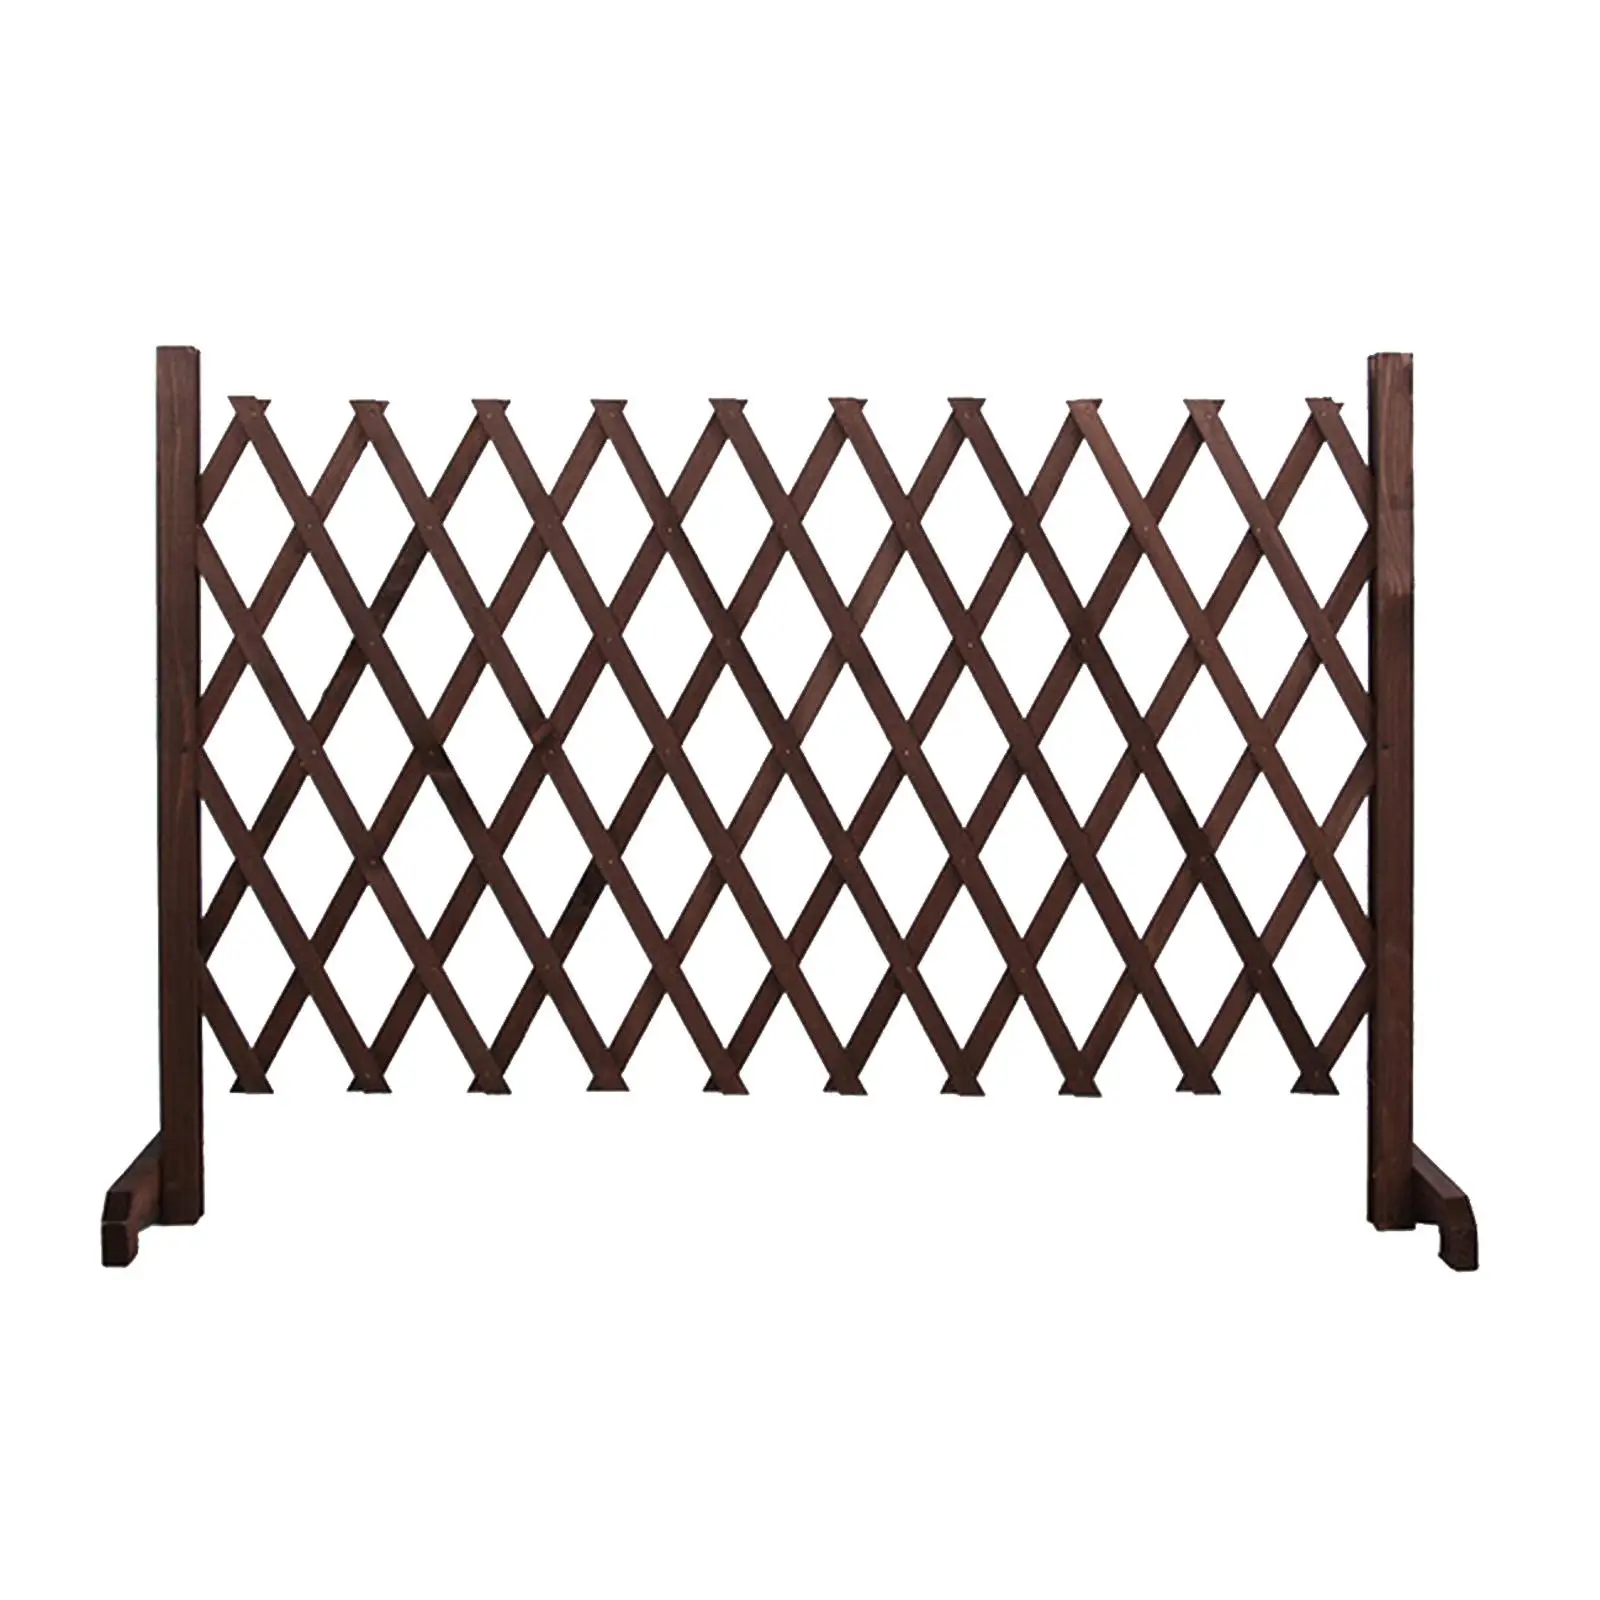 Wood Pet Fence Expandable Barrier Folding Fence Dog Gate for Stair Garden Patio Indoor Outdoor Hall House